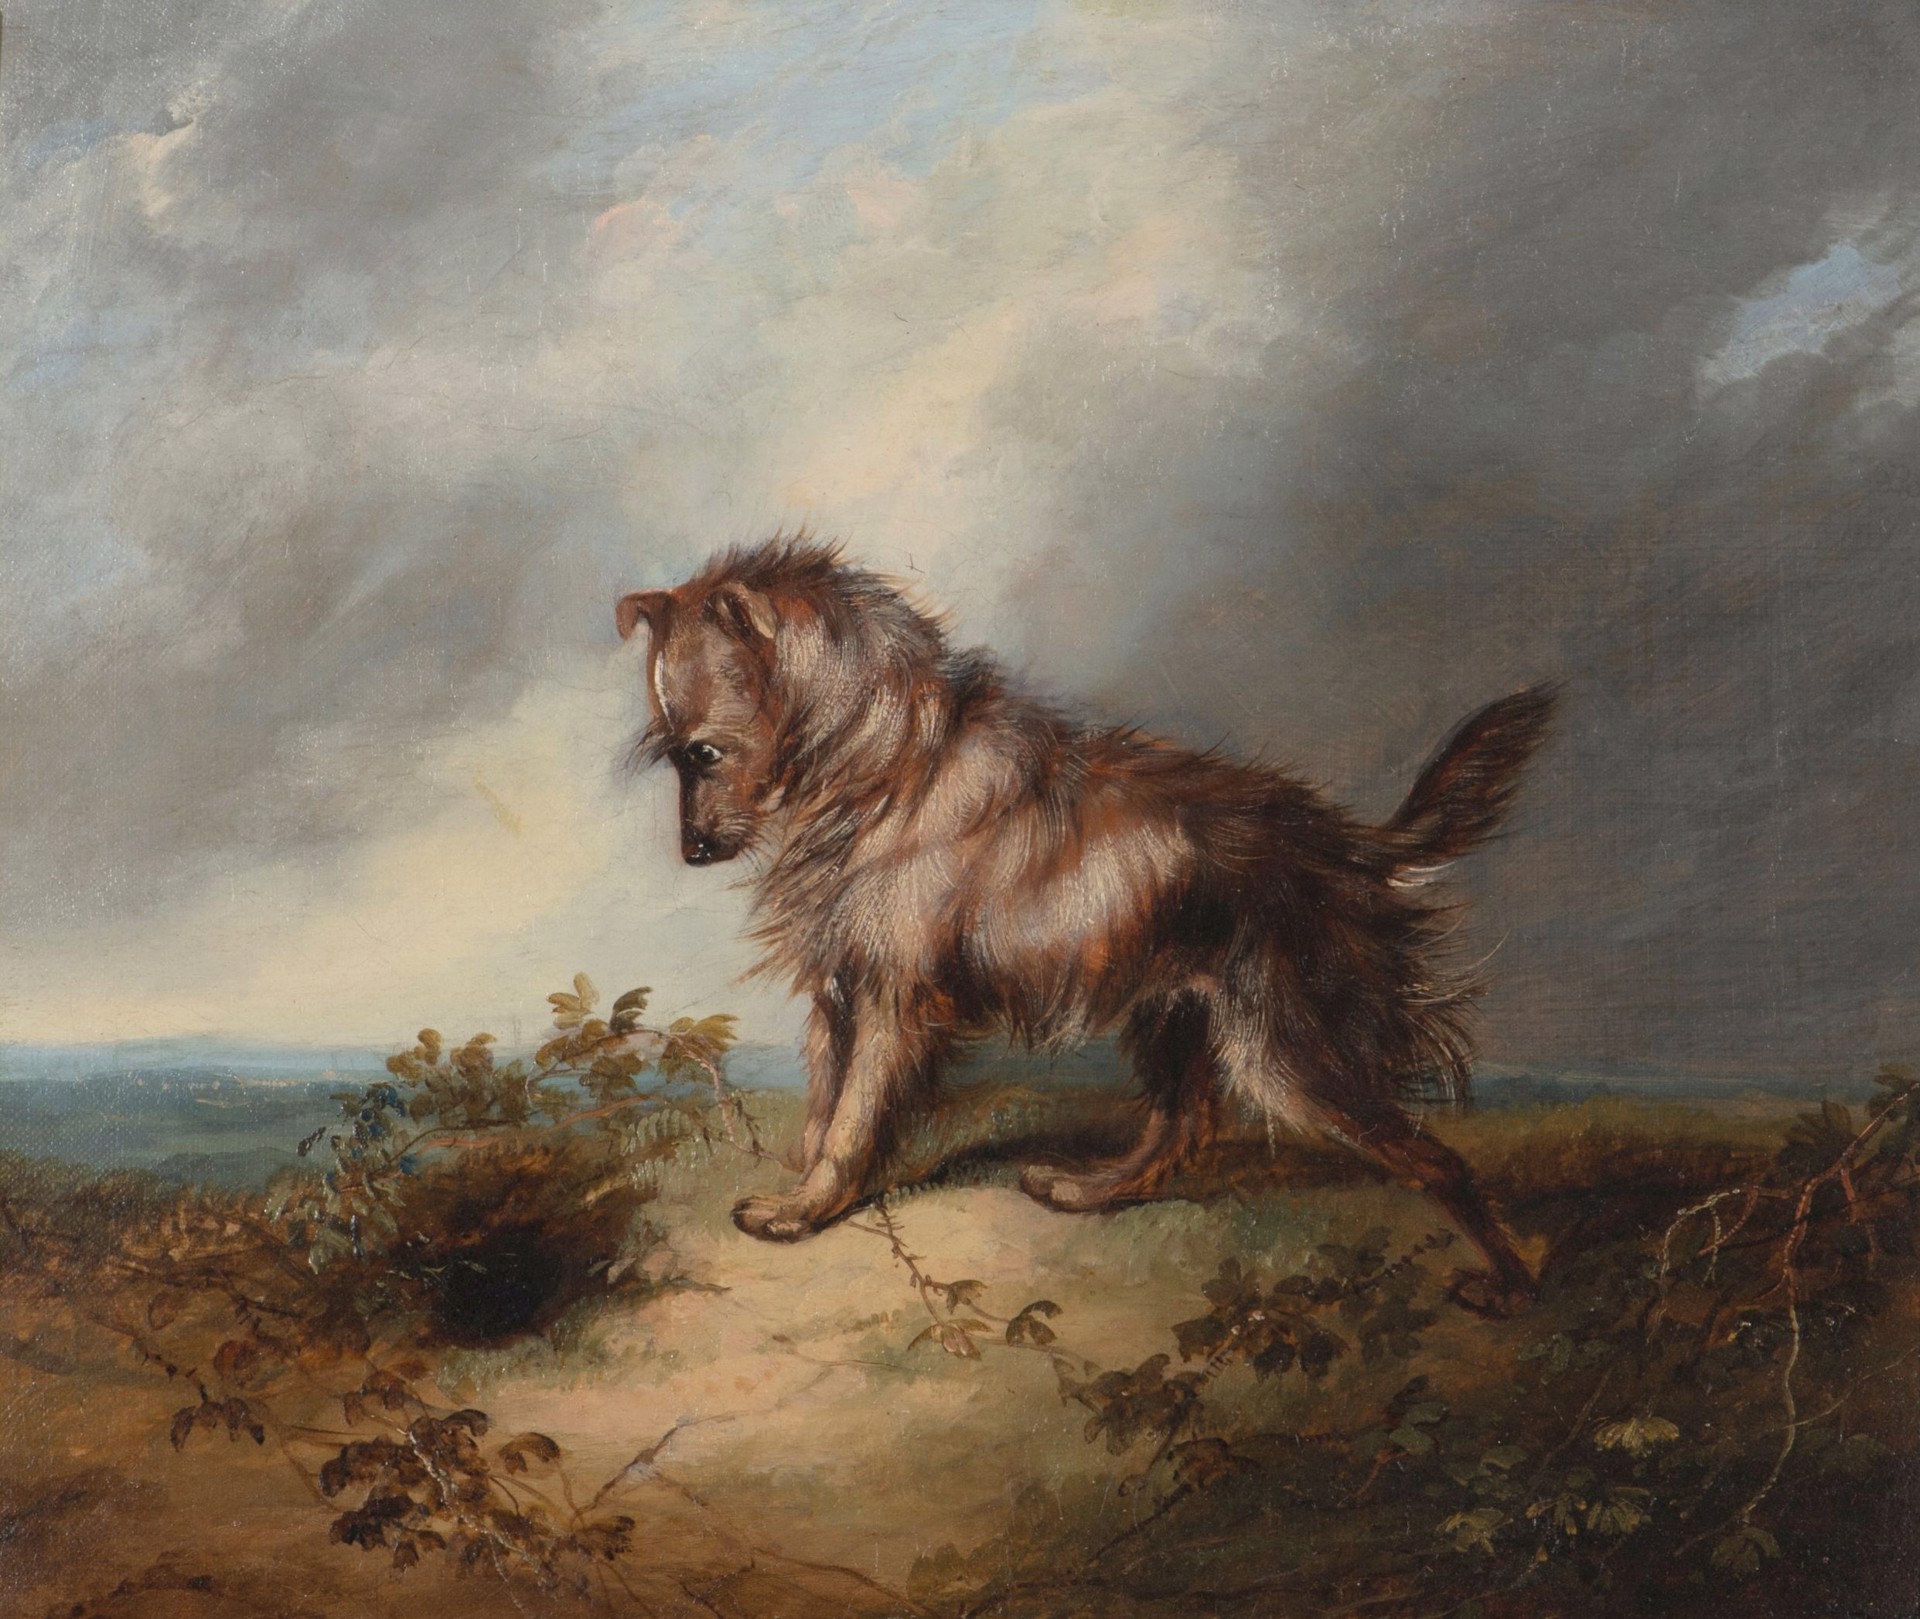 Terrier at Earth by George Armfield